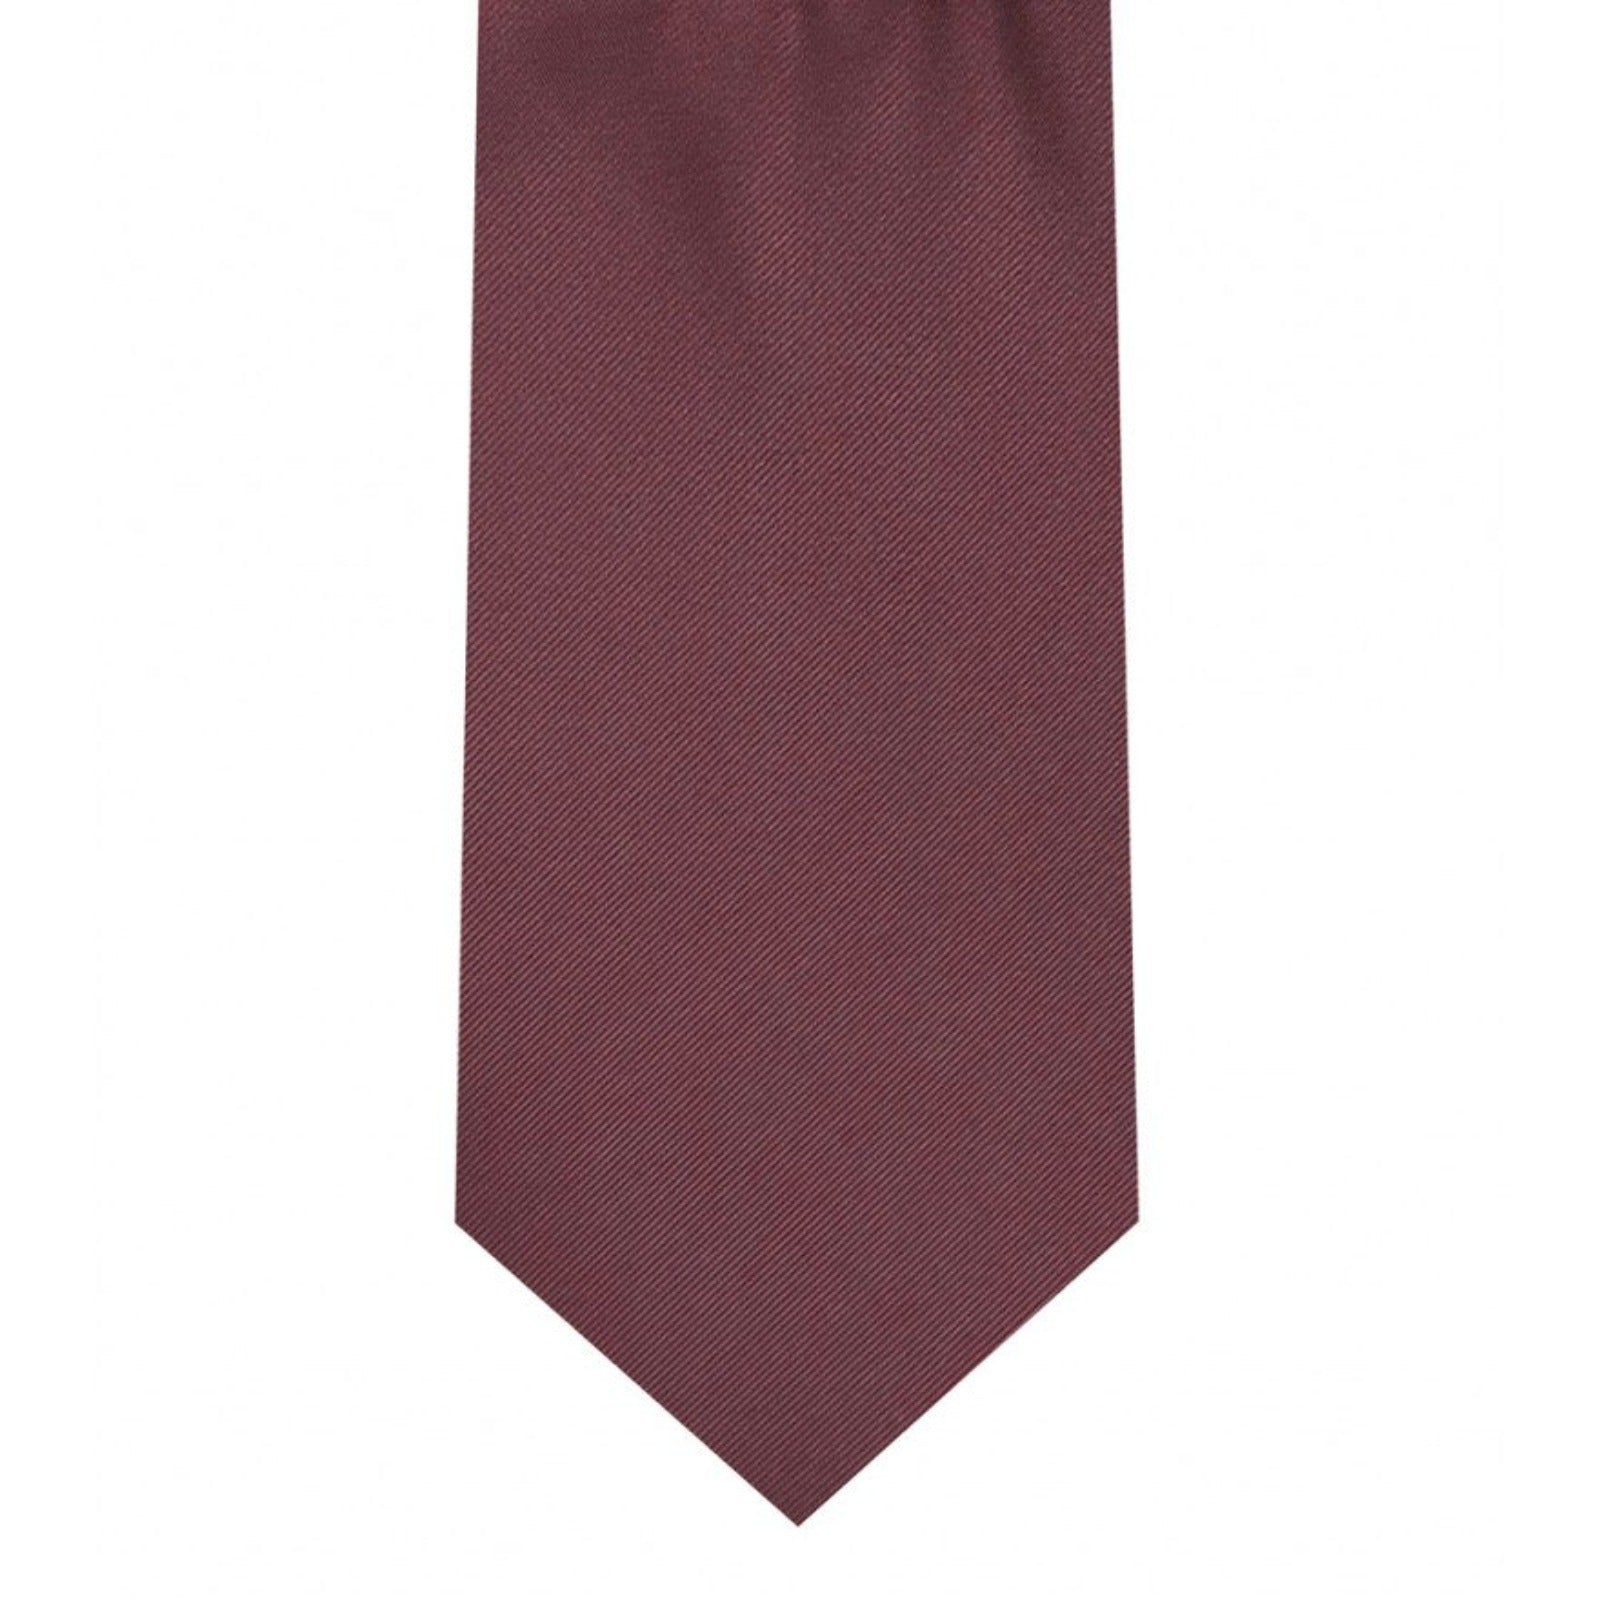 Classic Chianti Tie Skinny width 2.75 inches With Matching Pocket Square | KCT Menswear